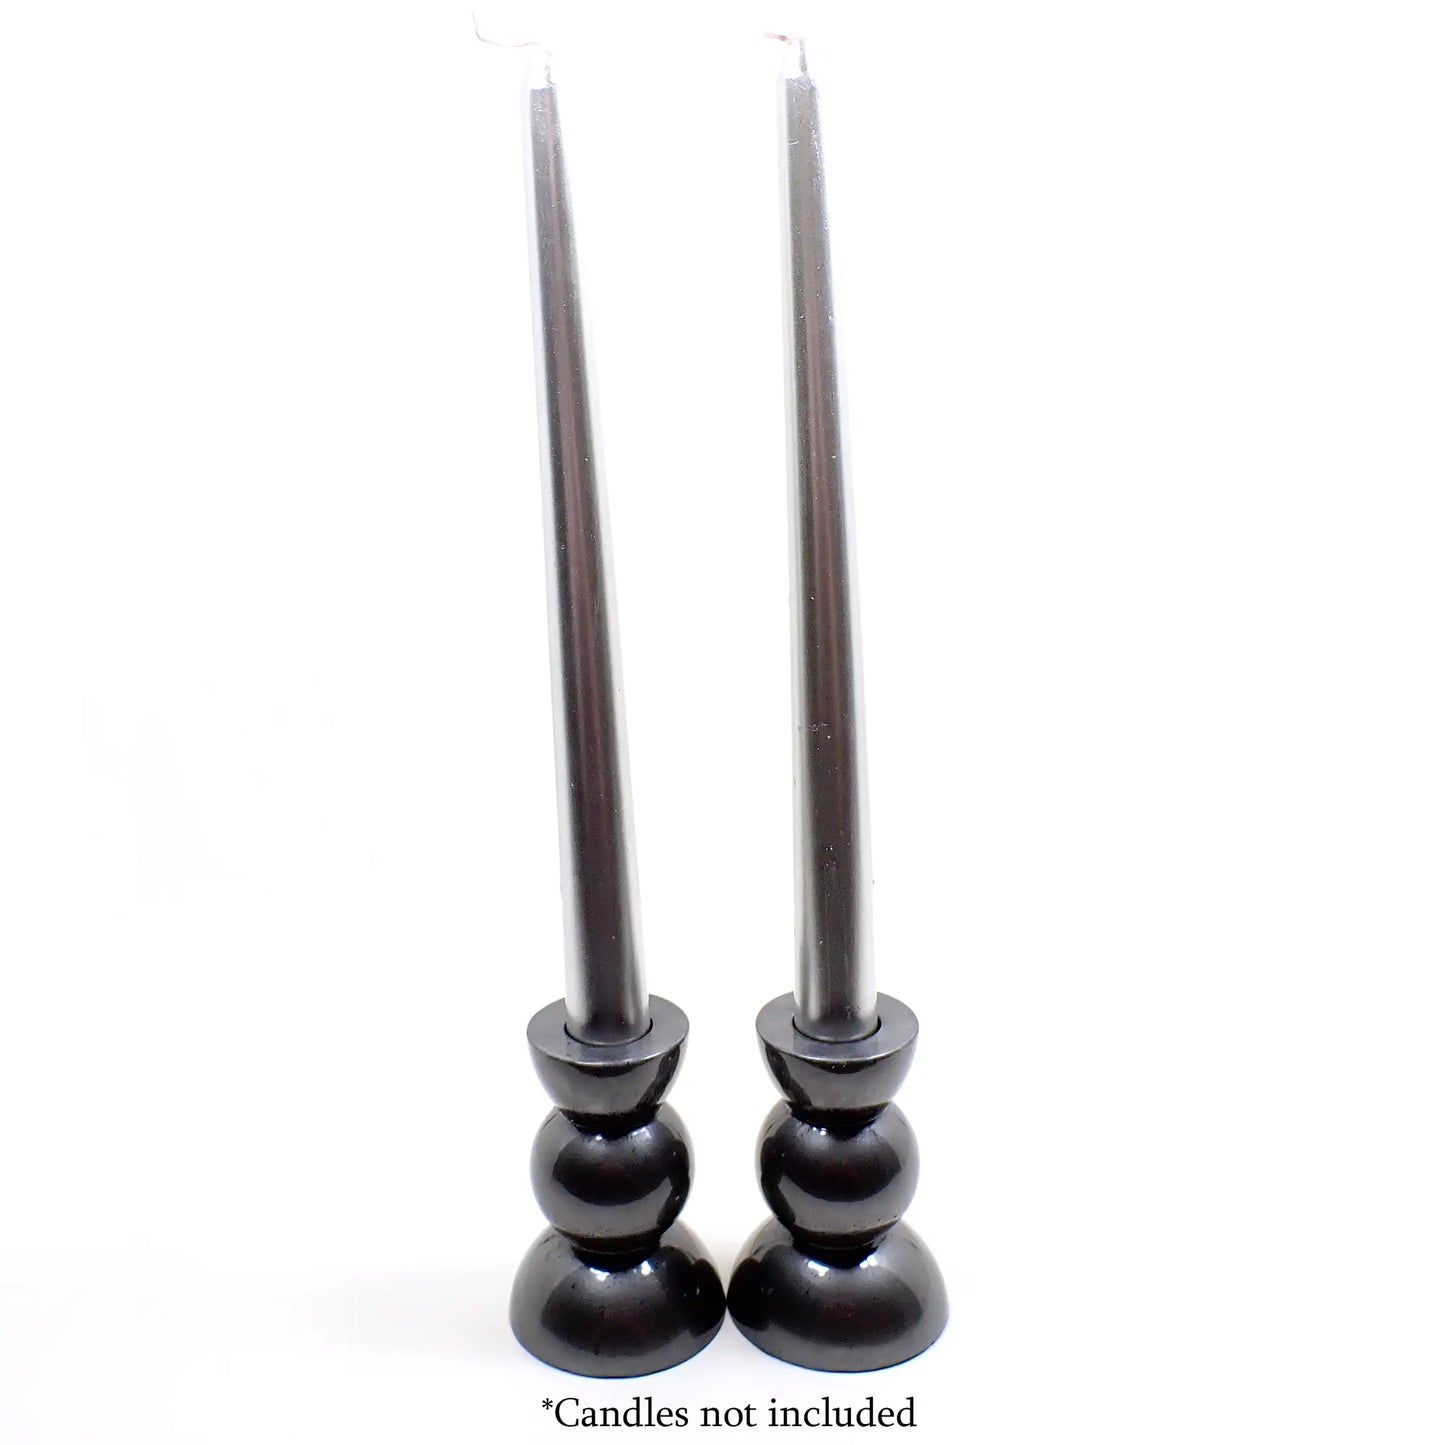 Set of Two Handmade Resin Pearly Metallic Gunmetal Gray Color Rounded Geometric Candlestick Holders